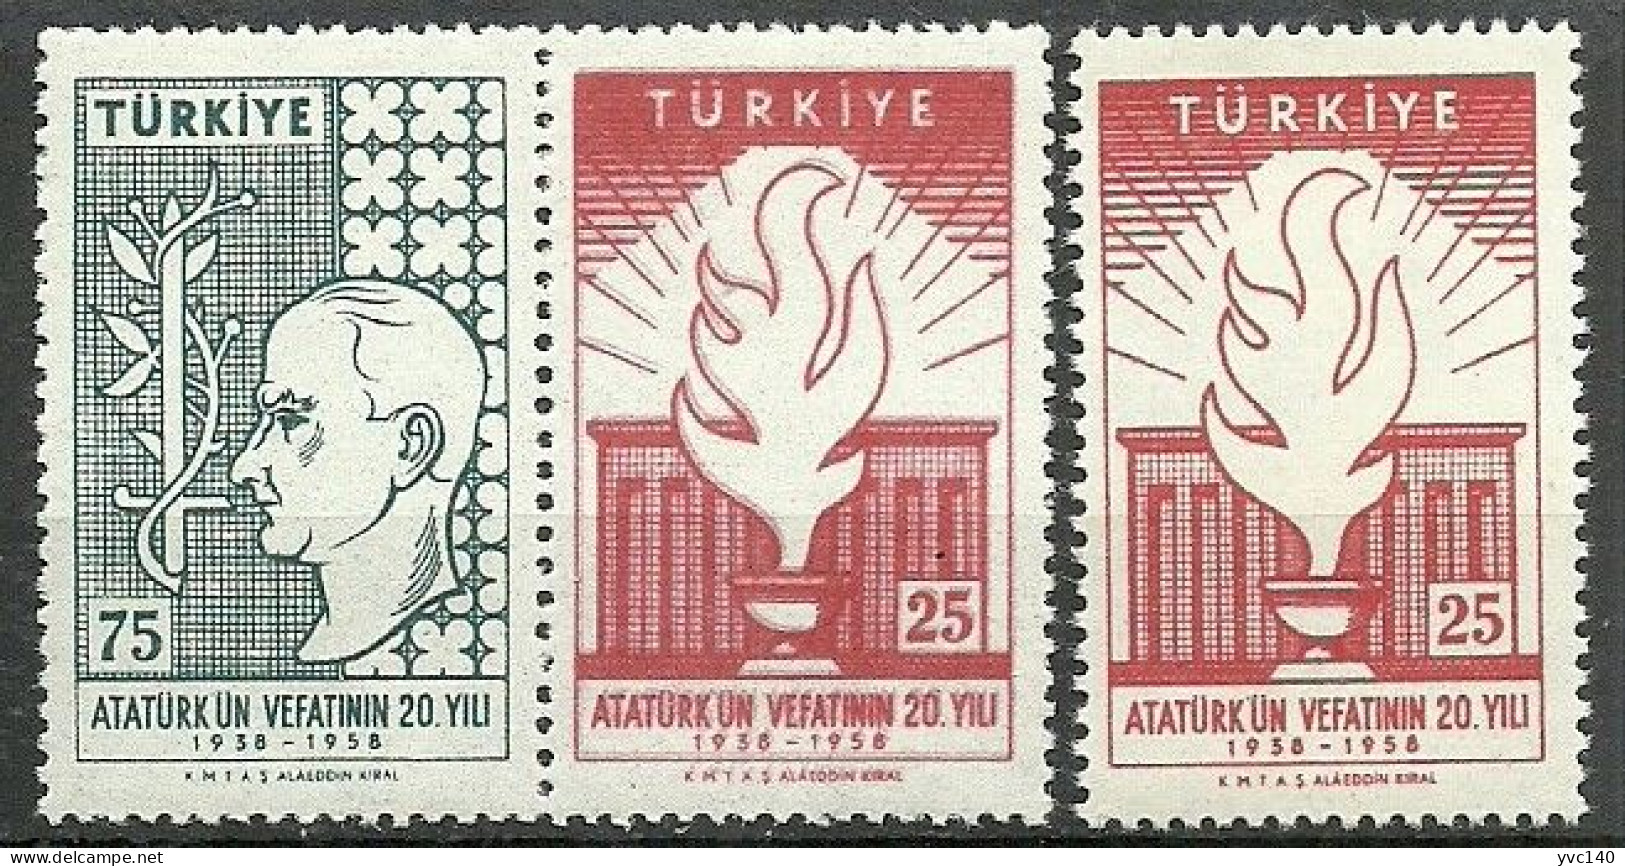 Turkey; 1958 20th Anniv. Of The Death Of Ataturk 25 K. ERROR "Shifted Print (Red Stamp)" - Unused Stamps